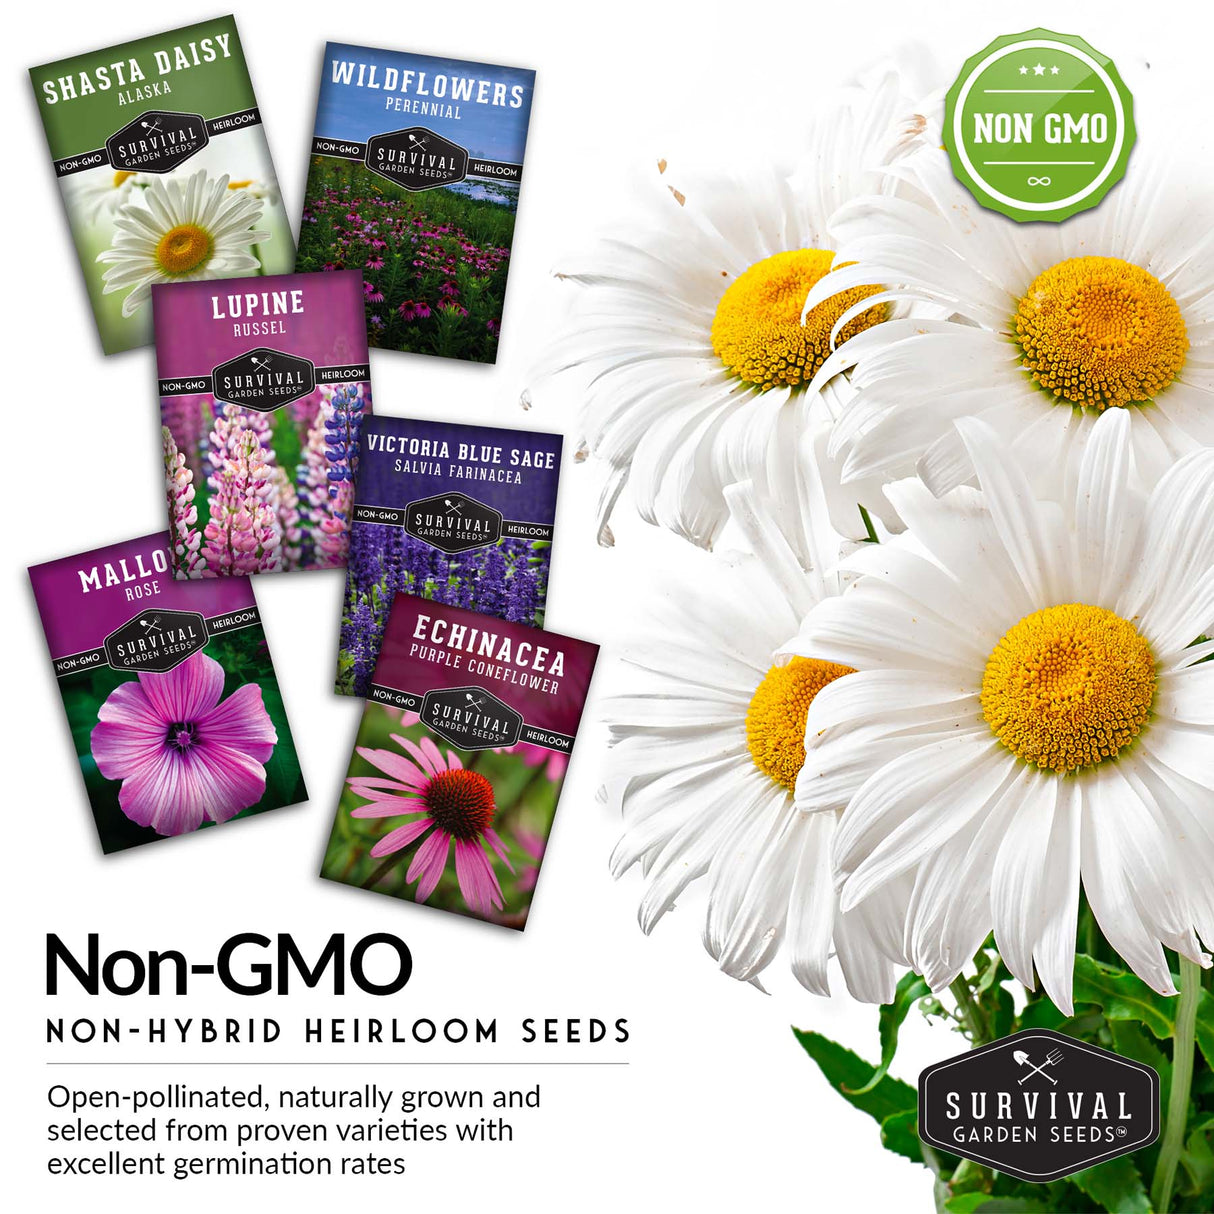 Non-GMO, non-hybrd heirloom flower seed packets